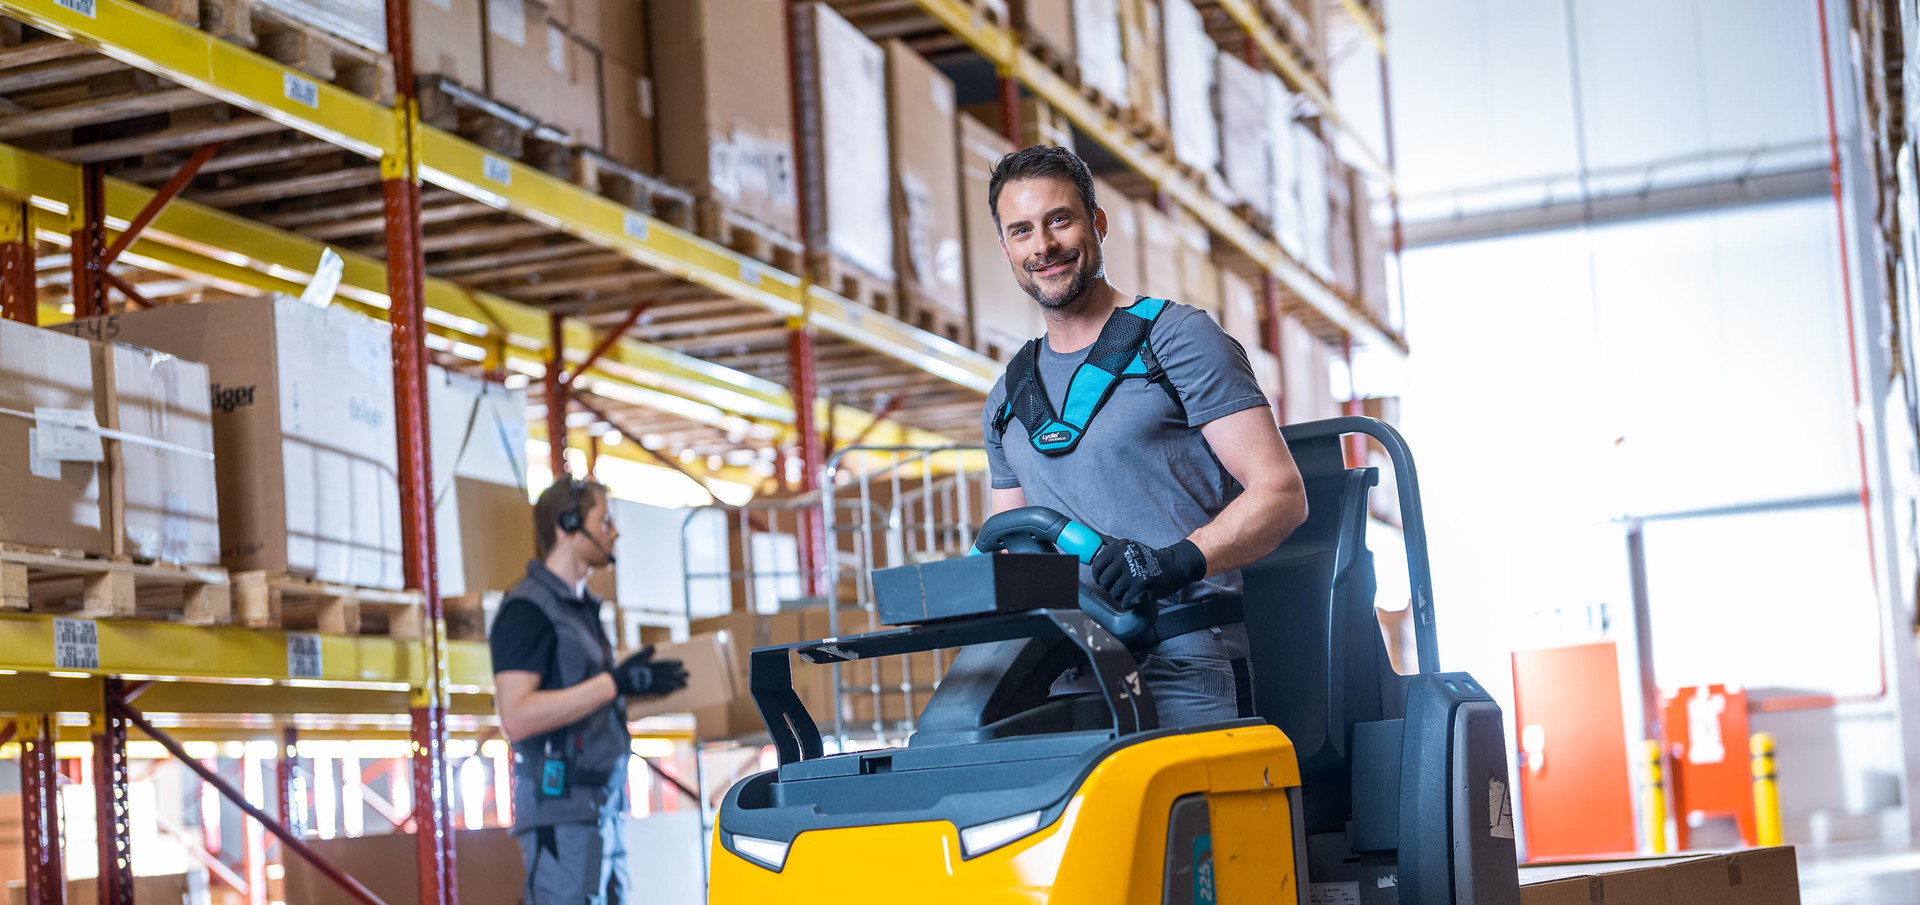 Several warehouse employees stand between storage racks and present different warehouse equipment such as Lydia VoiceWear, headsets, scanners and mobile devices that work with Lydia Voice.